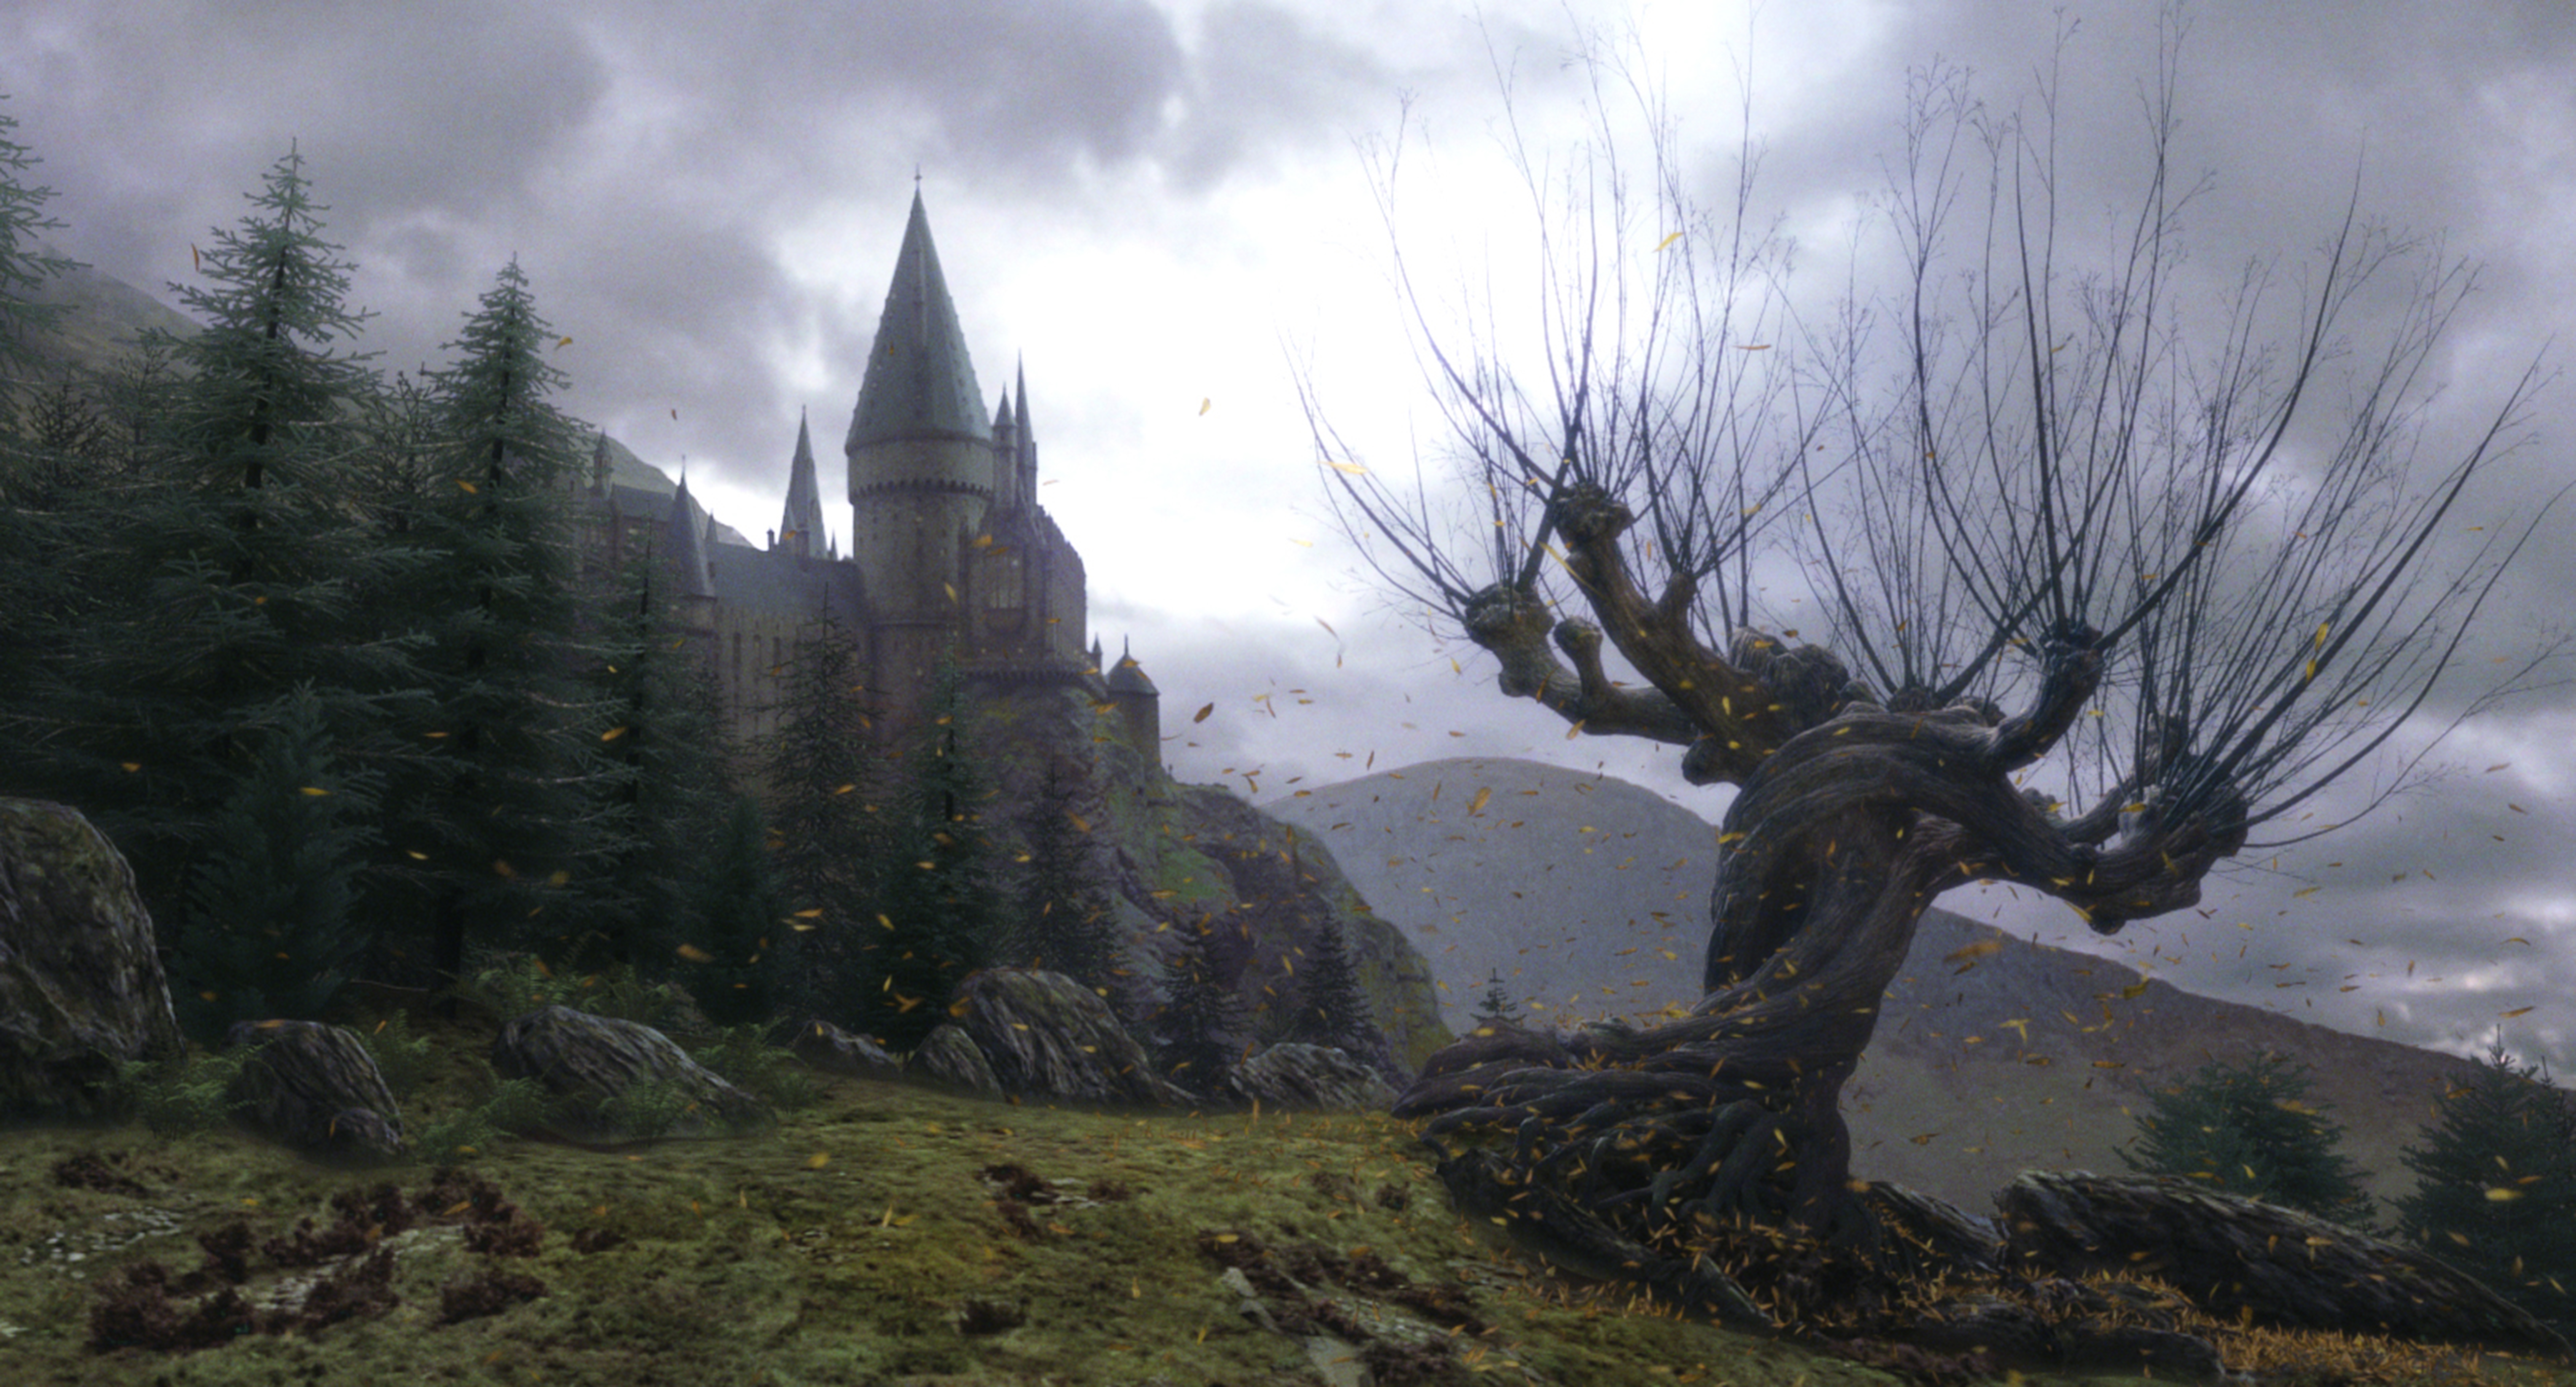 THE WHOMPING WILLOW